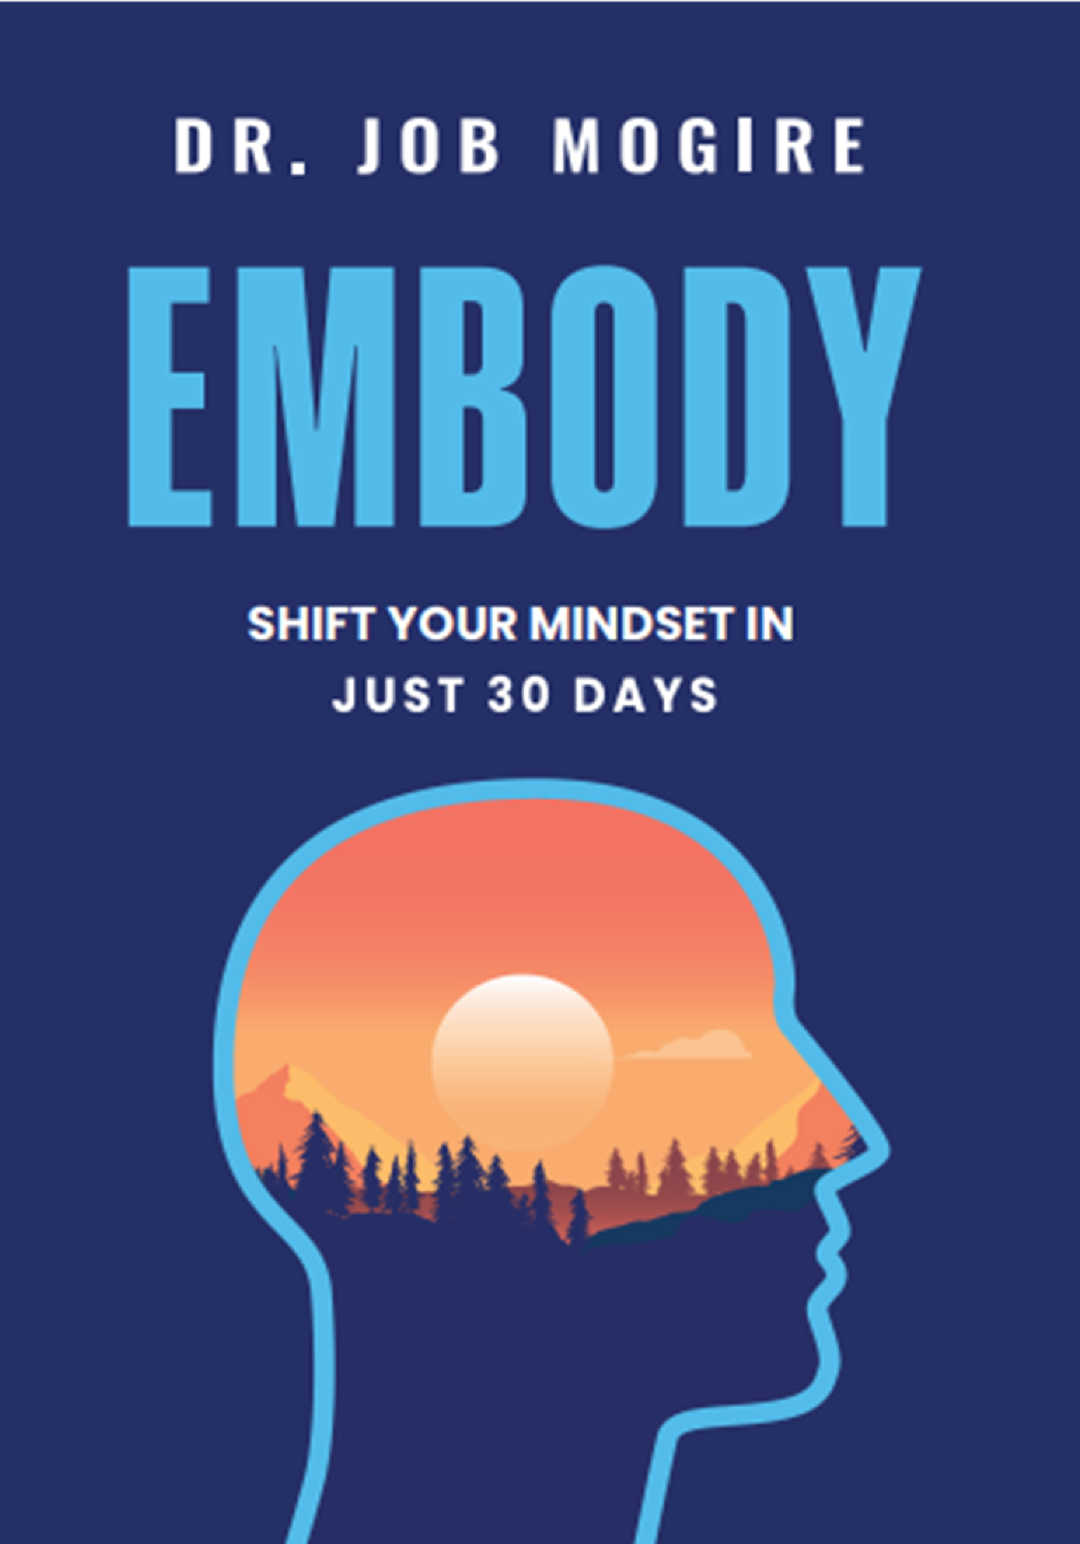 EMBODY: Shift Your Mindset in Just 30 Days